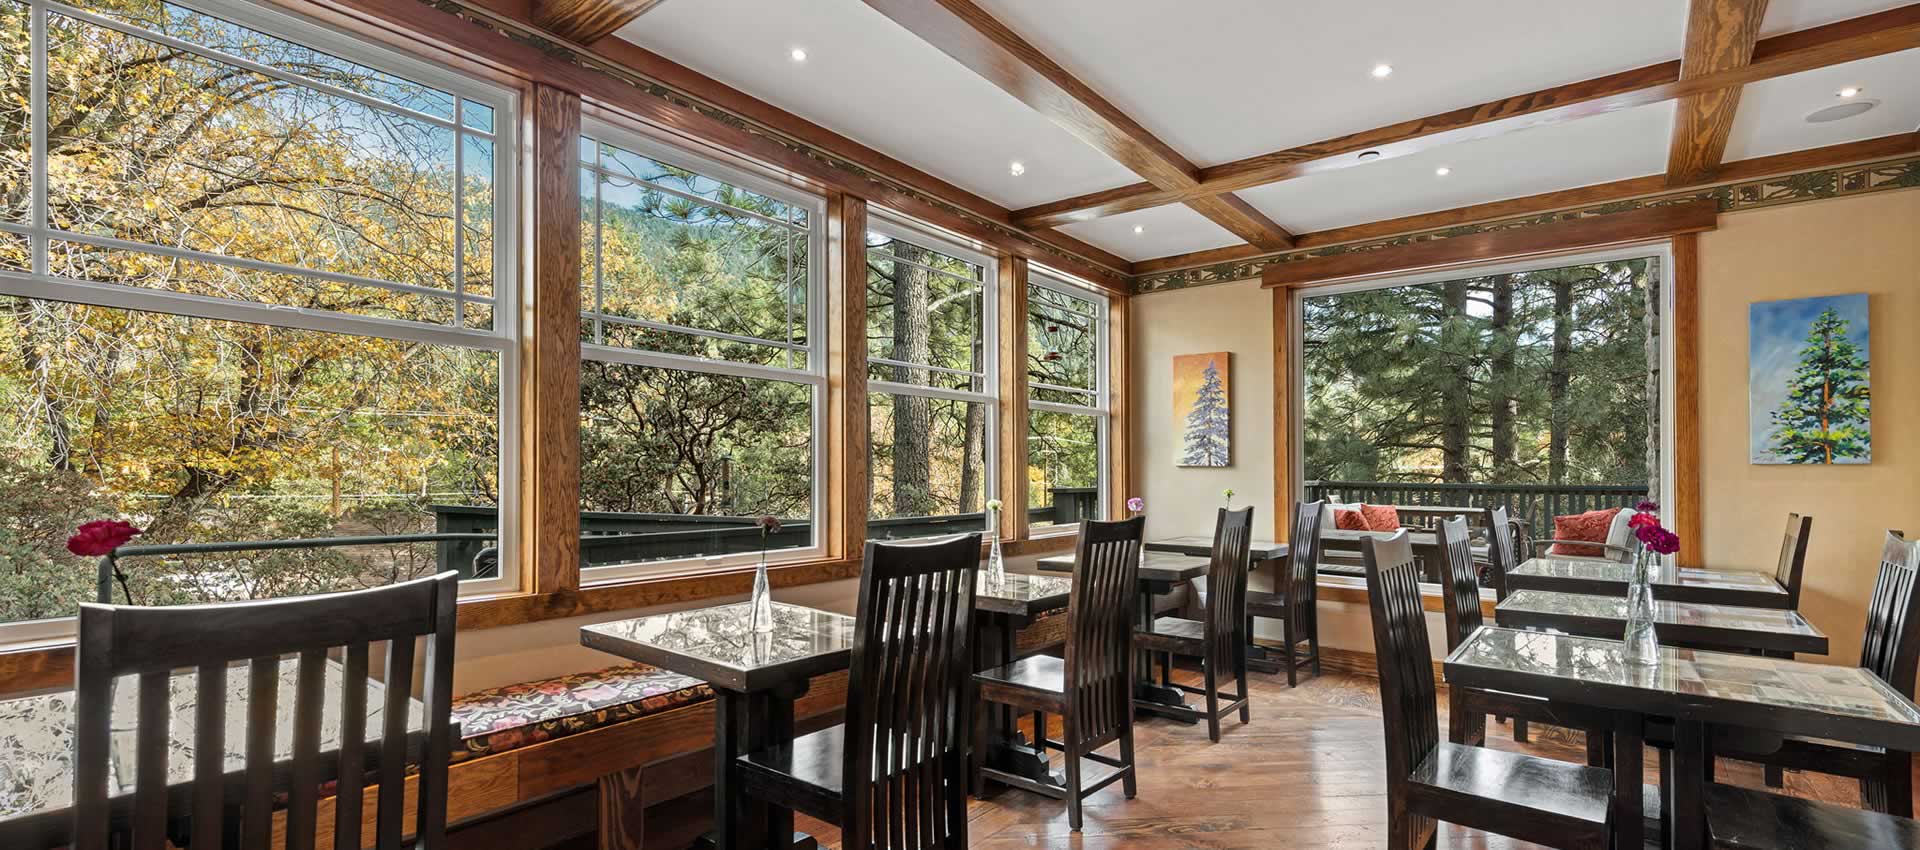 Grand Idyllwild dining room tables and chairs with mountain views